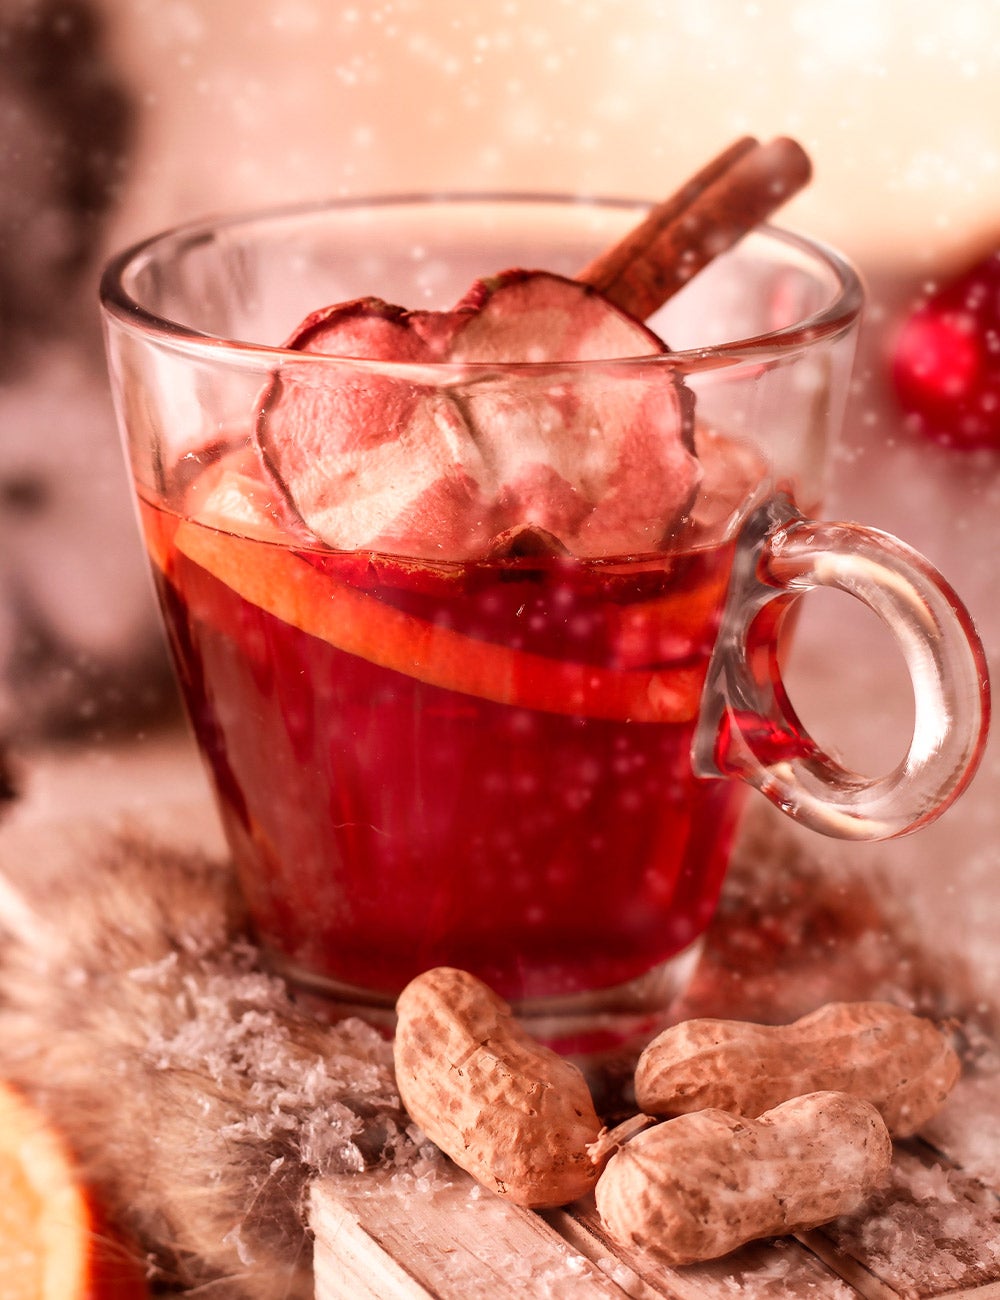 Mulled Wine